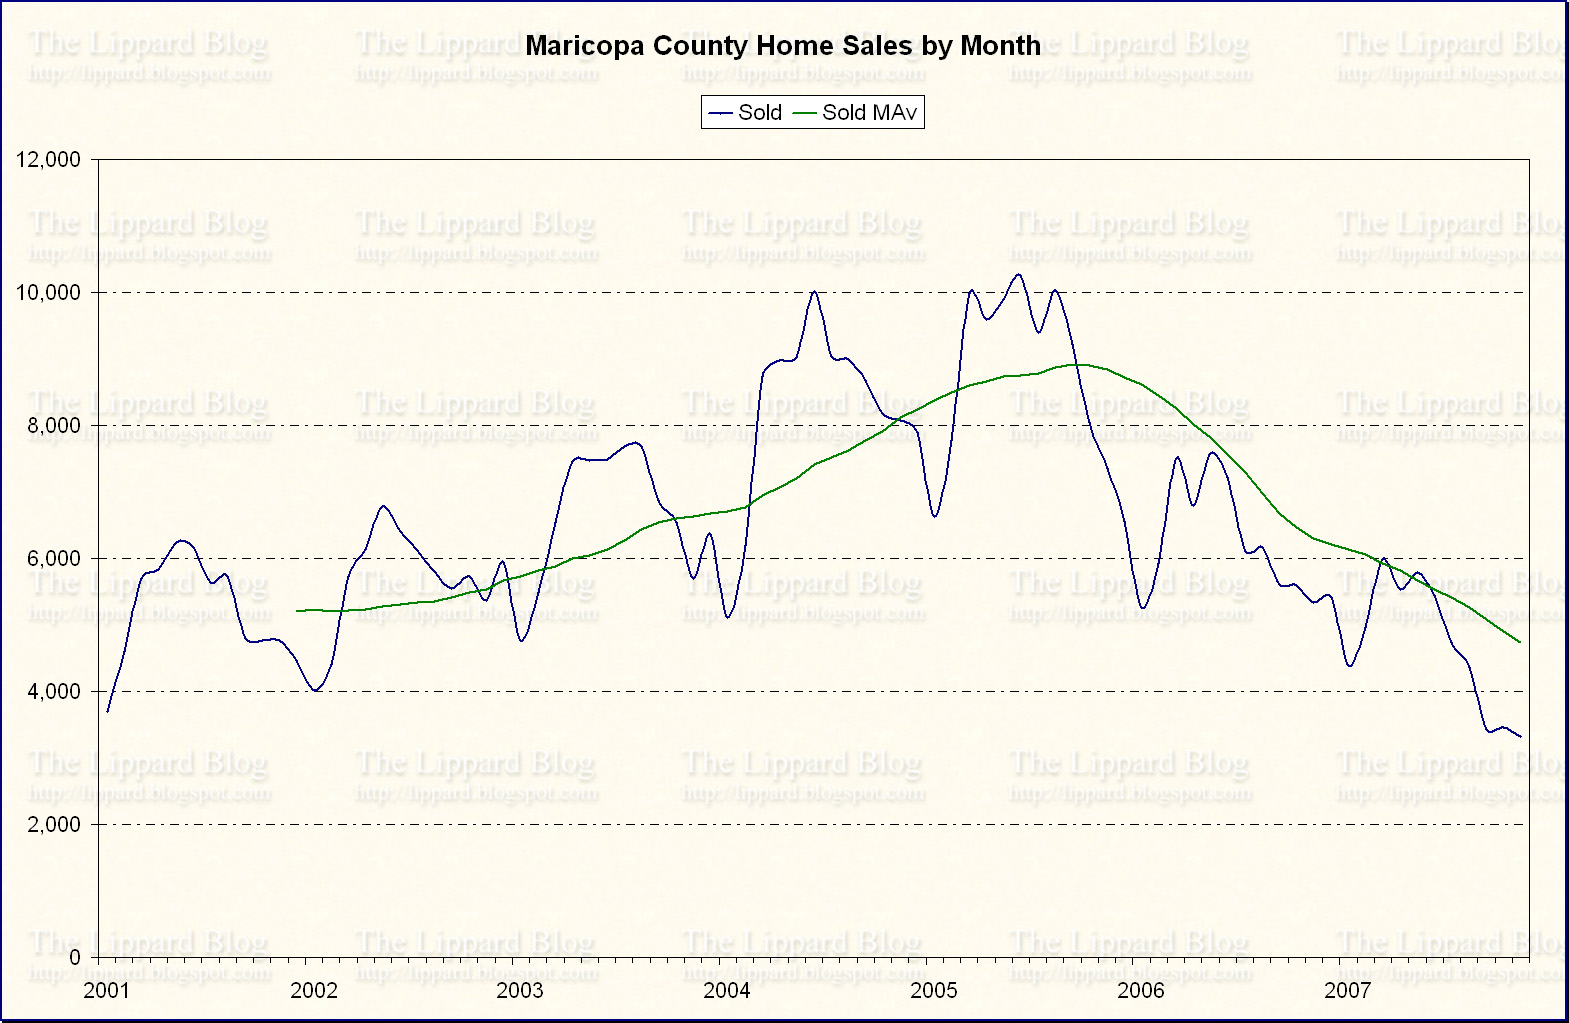 Number of Homes Sold Per Month in Maricopa County - Click to Enlarge